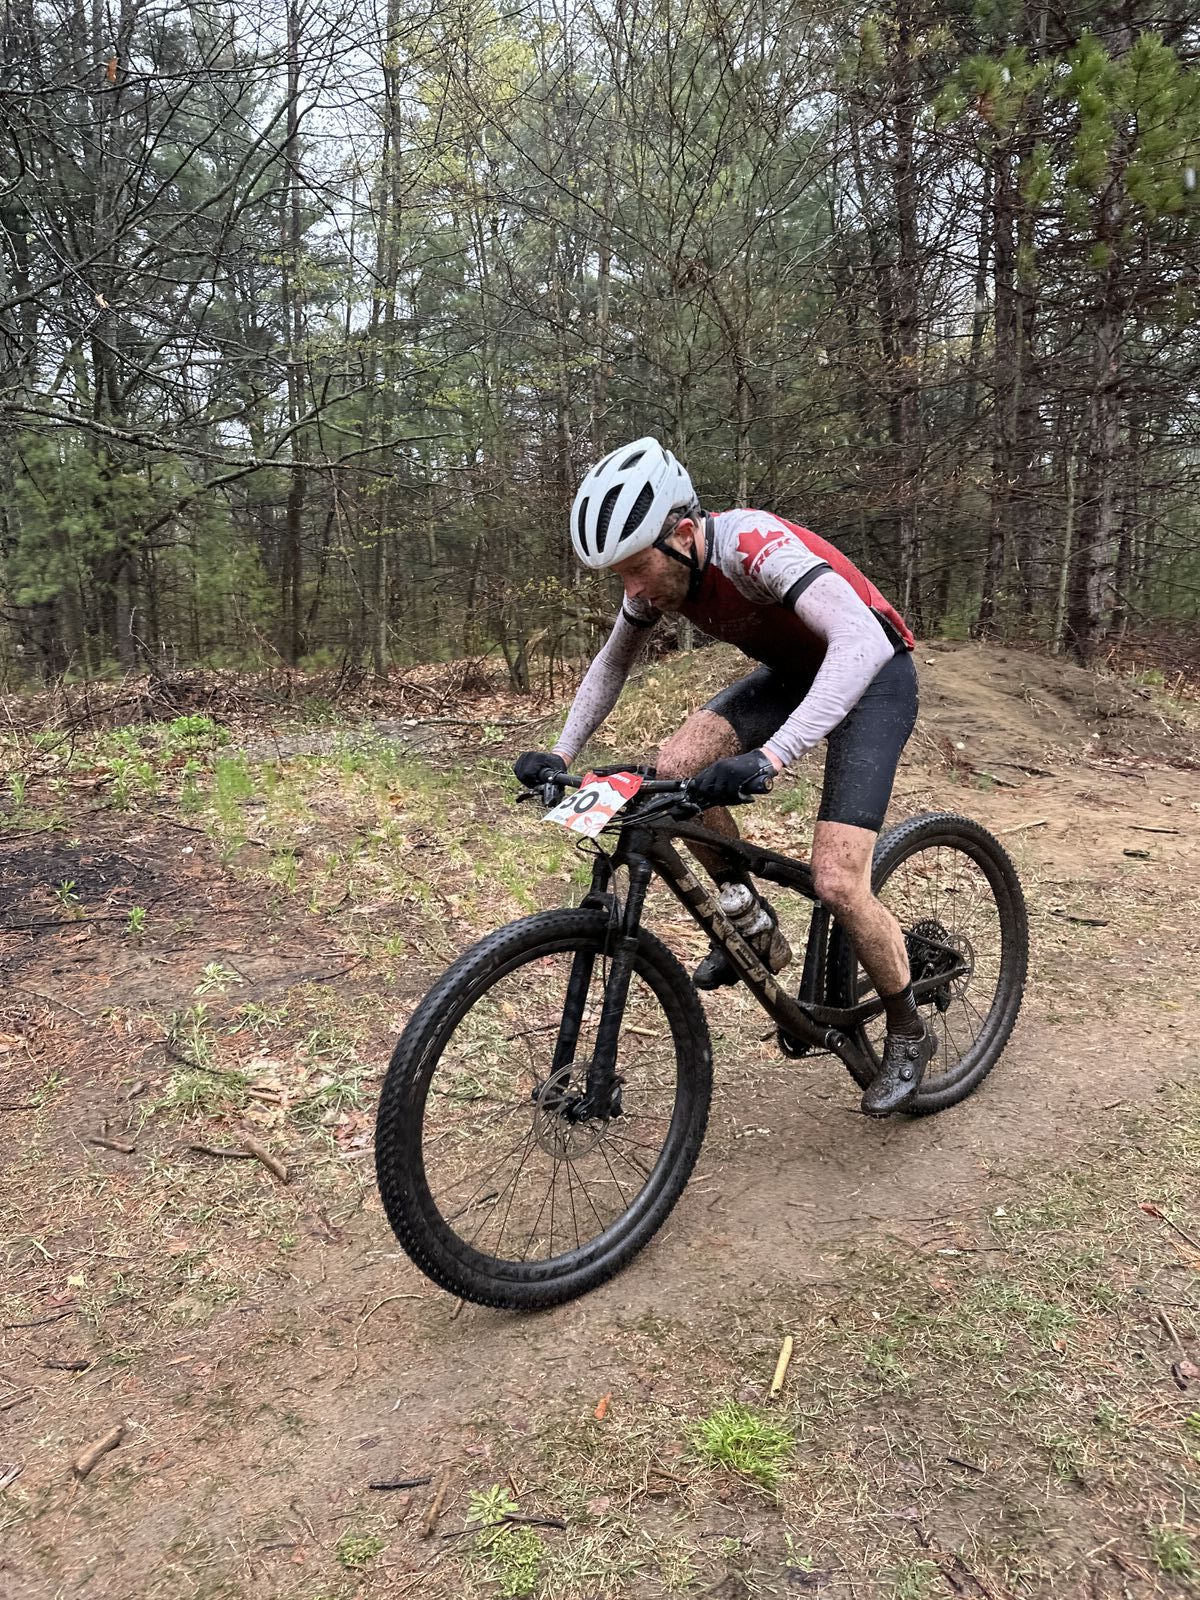 A cyclist wearing a white helmet, red and white clothing, and riding a black mountain bike navigates a dirt trail within a forested area. The ground is damp and scattered with leaves and twigs, suggesting recent rain.